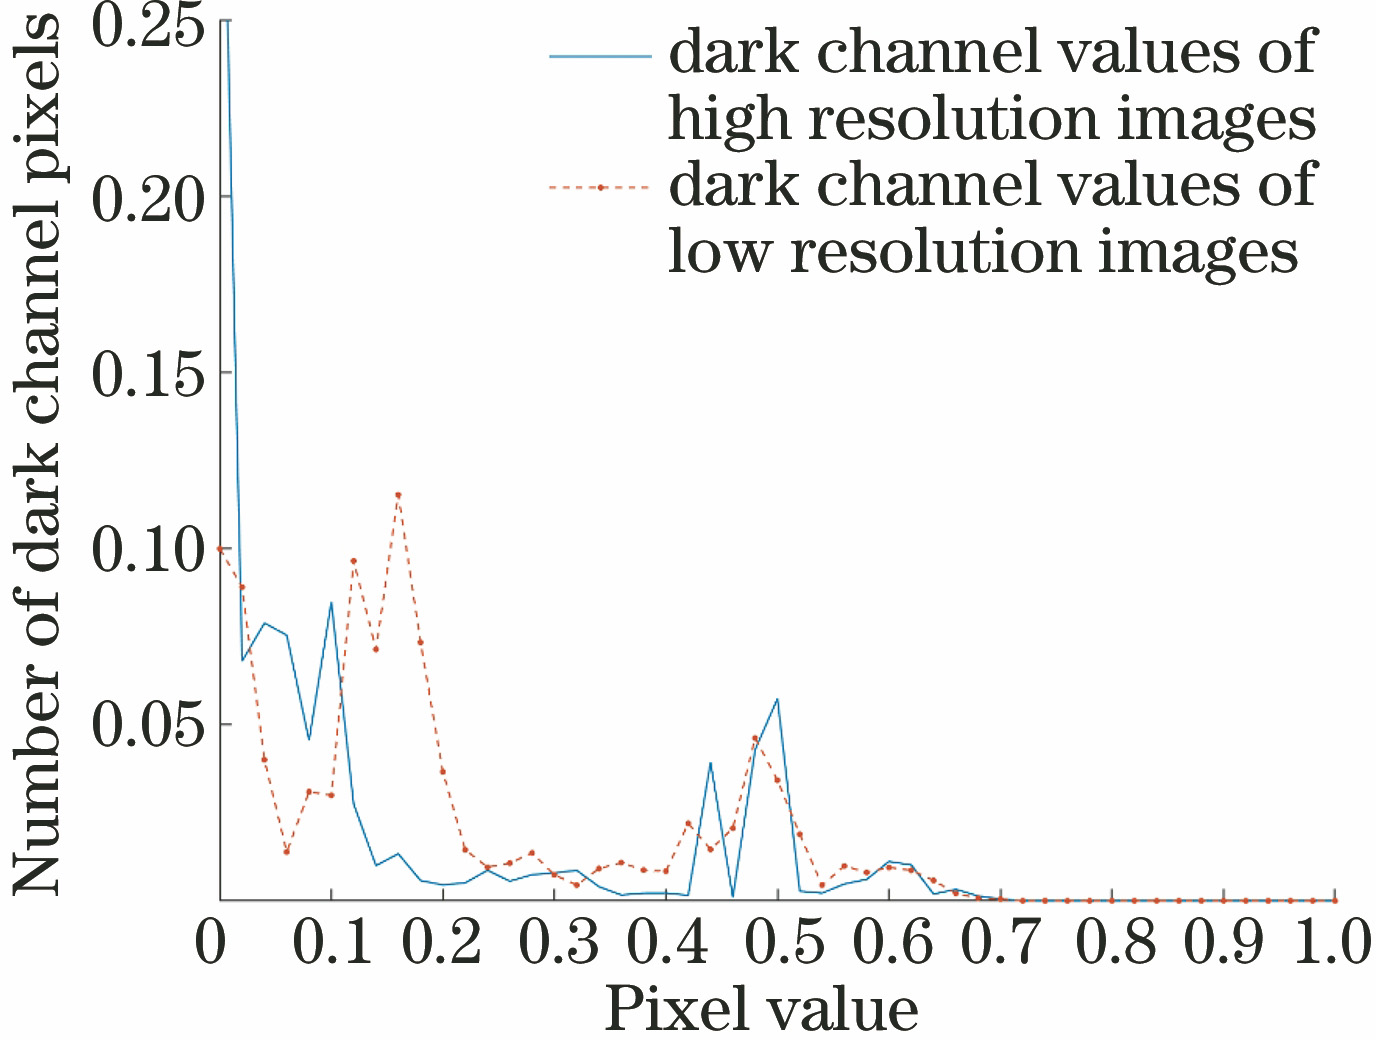 Statistics for dark channel values of high resolution images and low resolution images